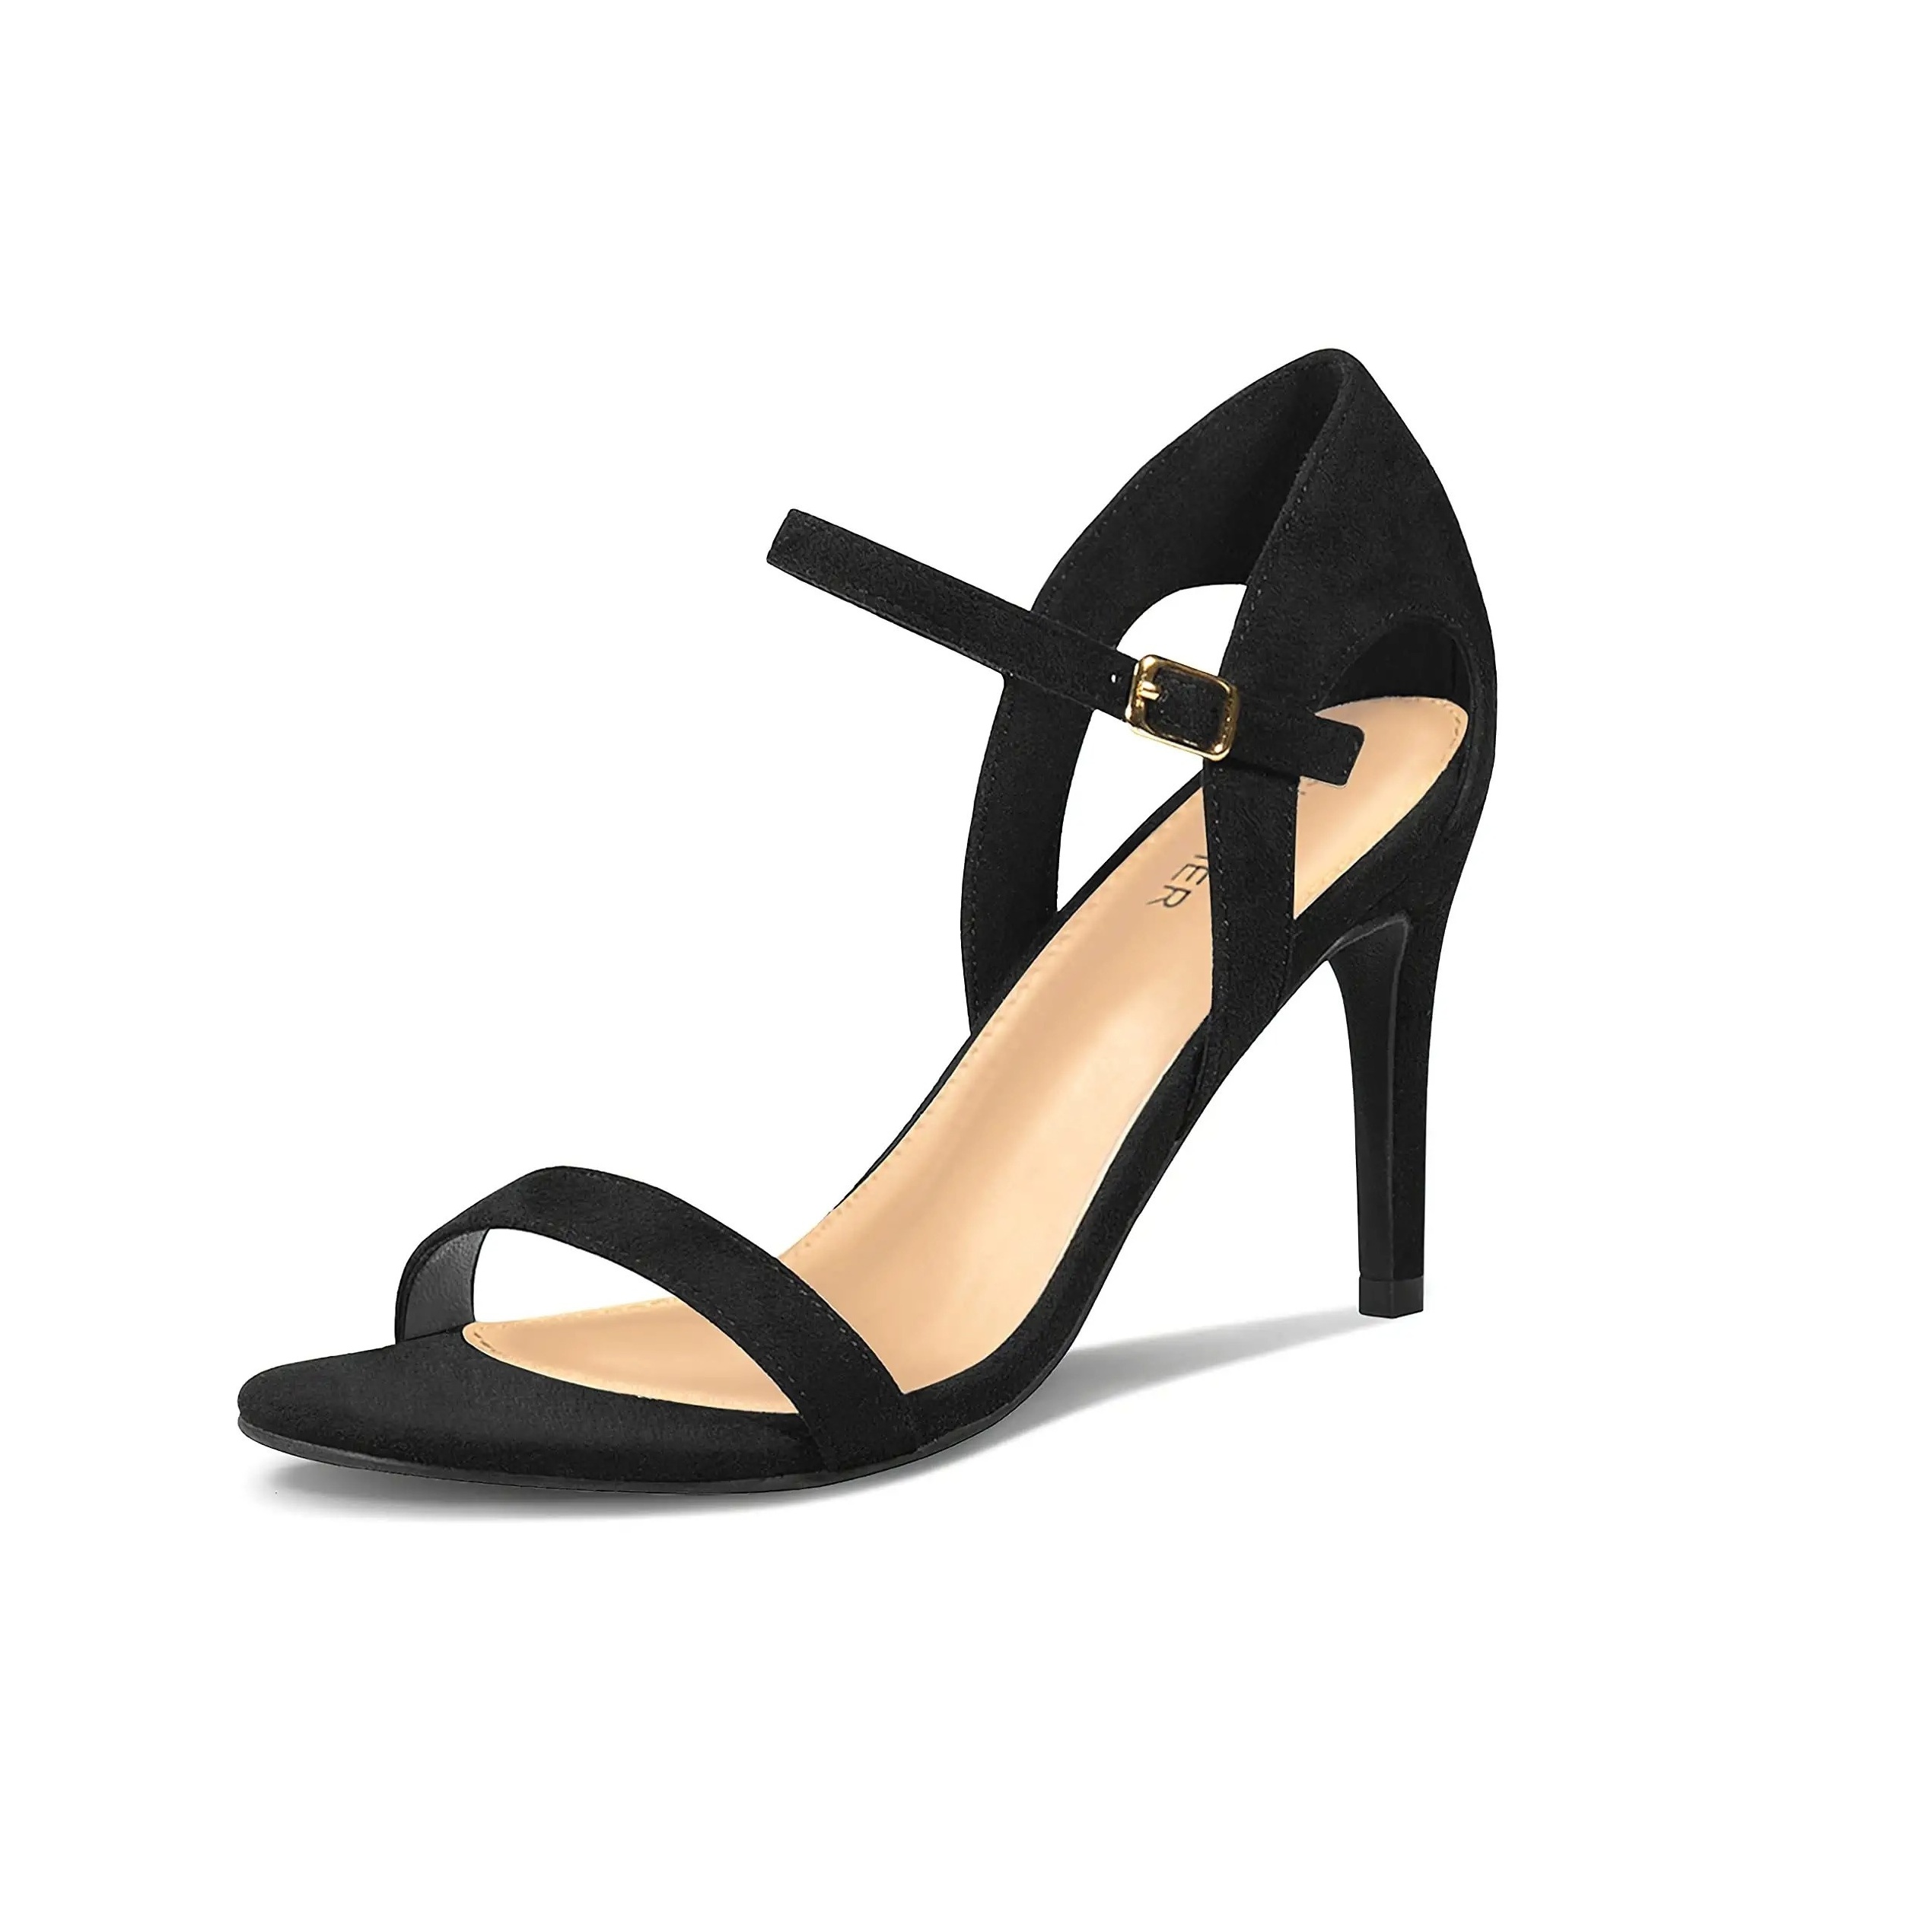 

Women's Ankle Strap High Heeled Sandals, Stiletto Heeled Tie Strap Black Pumps, Party & Going Out Shoes, Prom Shoes